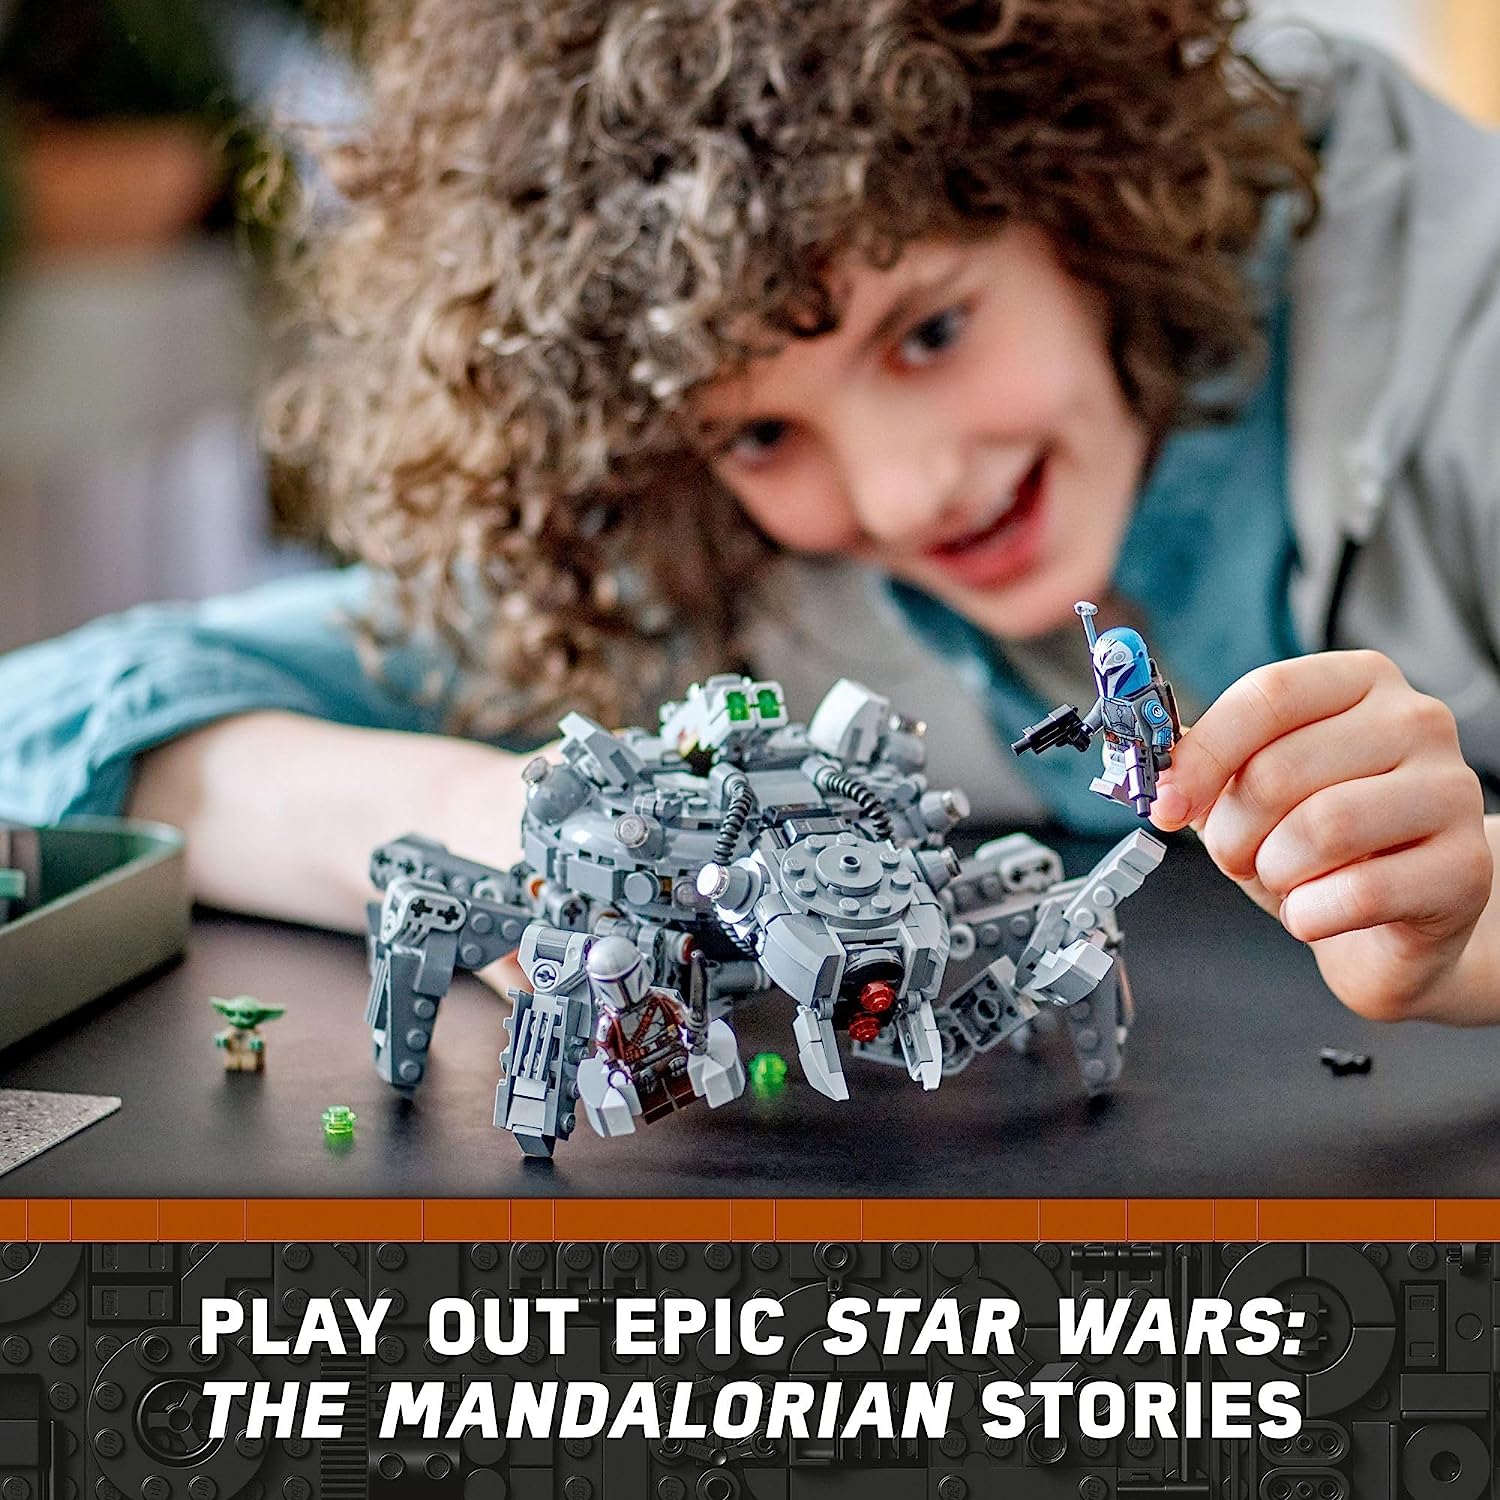 LEGO Star Wars Spider Tank 75361, Building Toy Mech from The Mandalorian Season 3, Includes The Mandalorian with Darksaber, Bo-Katan, and Grogu 'Baby Yoda' Minifigures, Gift Idea for Kids Ages 9+